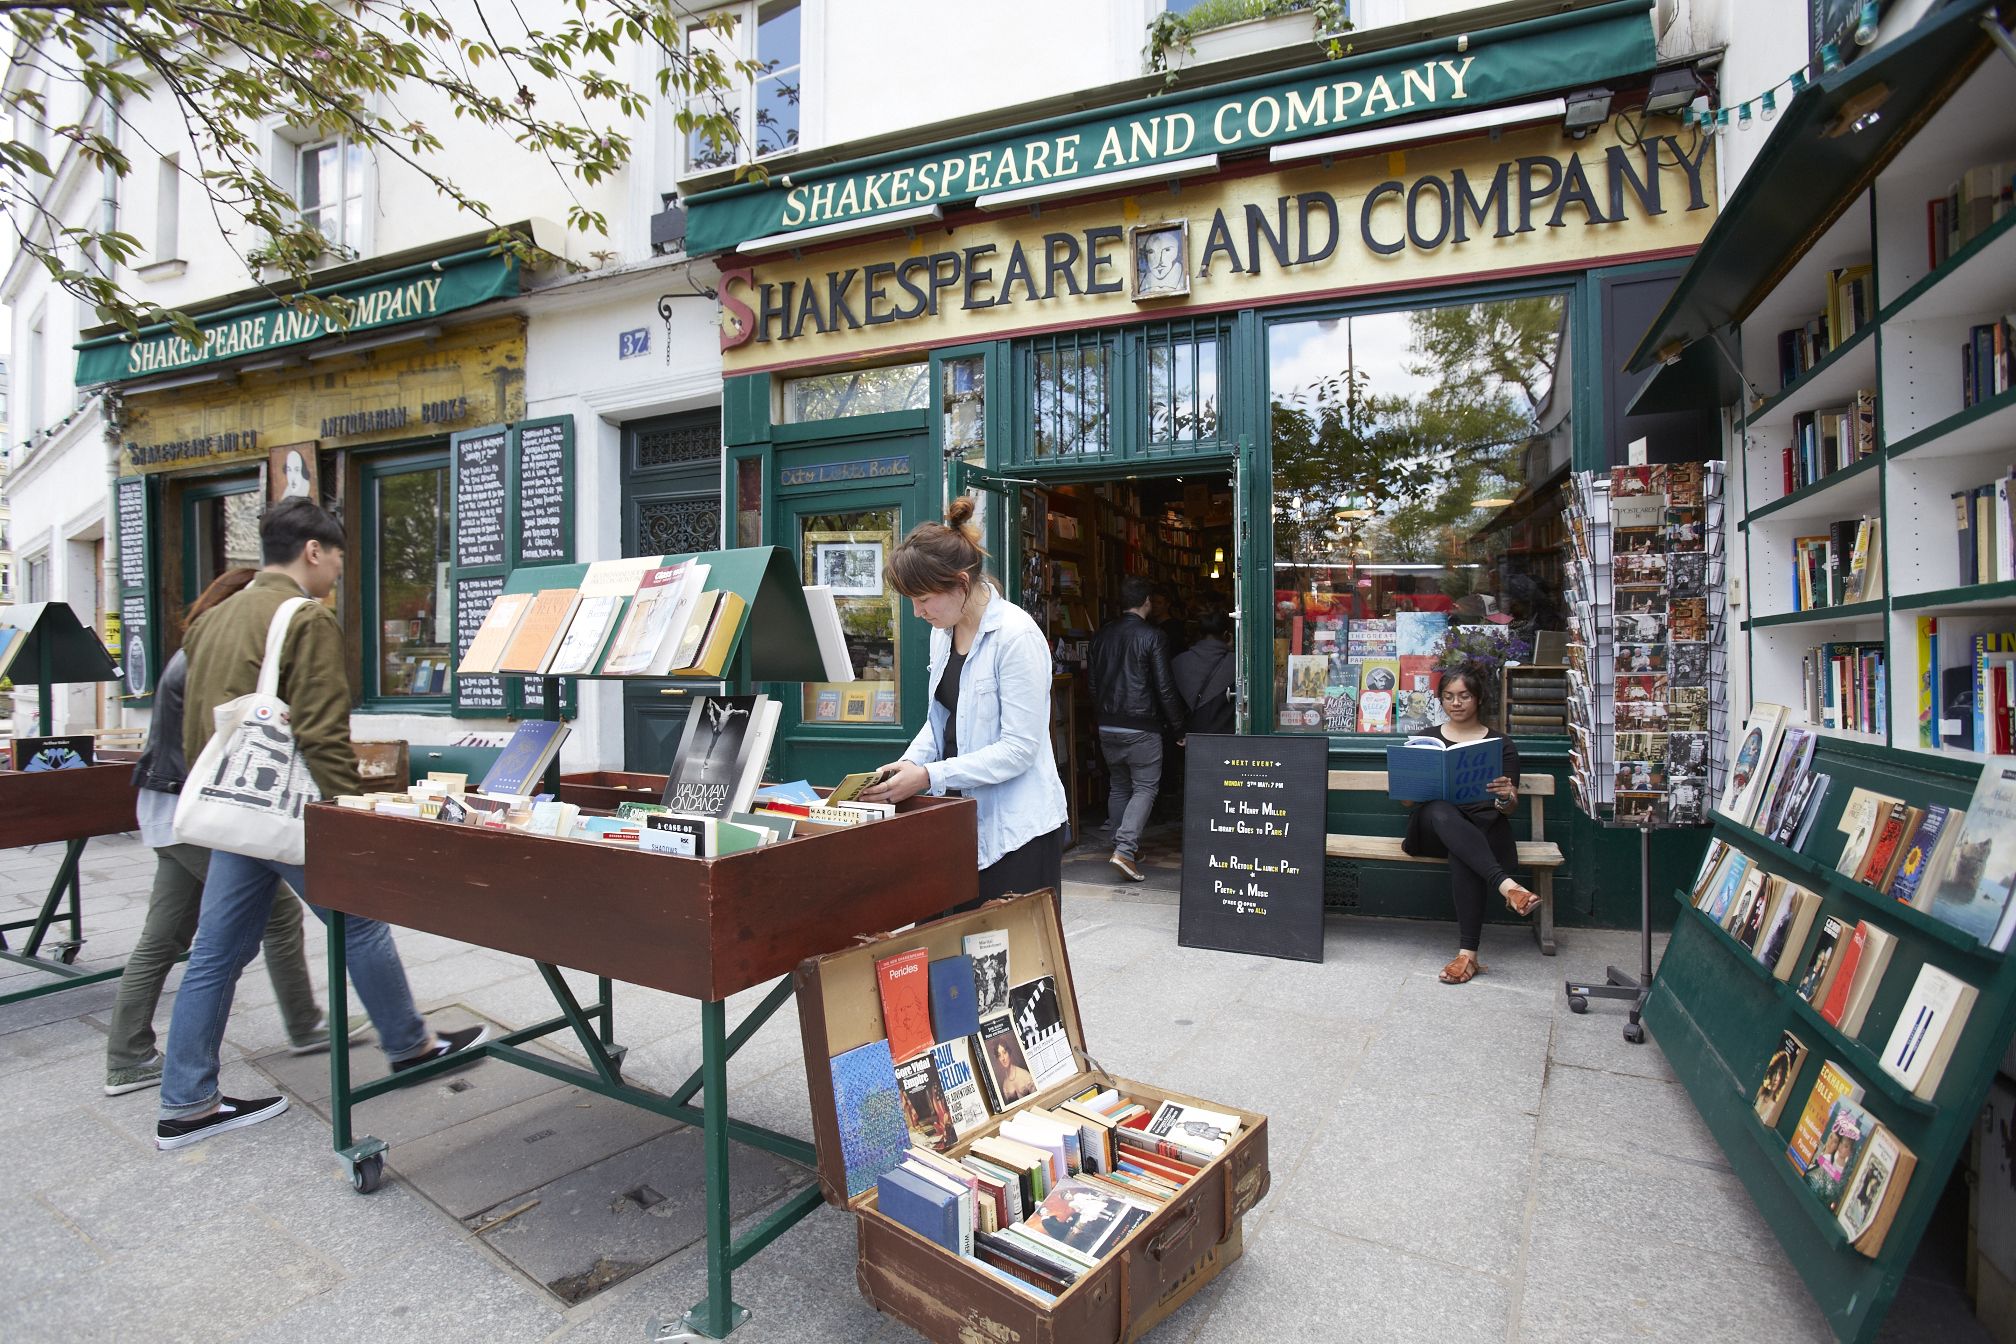 World's best bookstores from London to Los Angeles